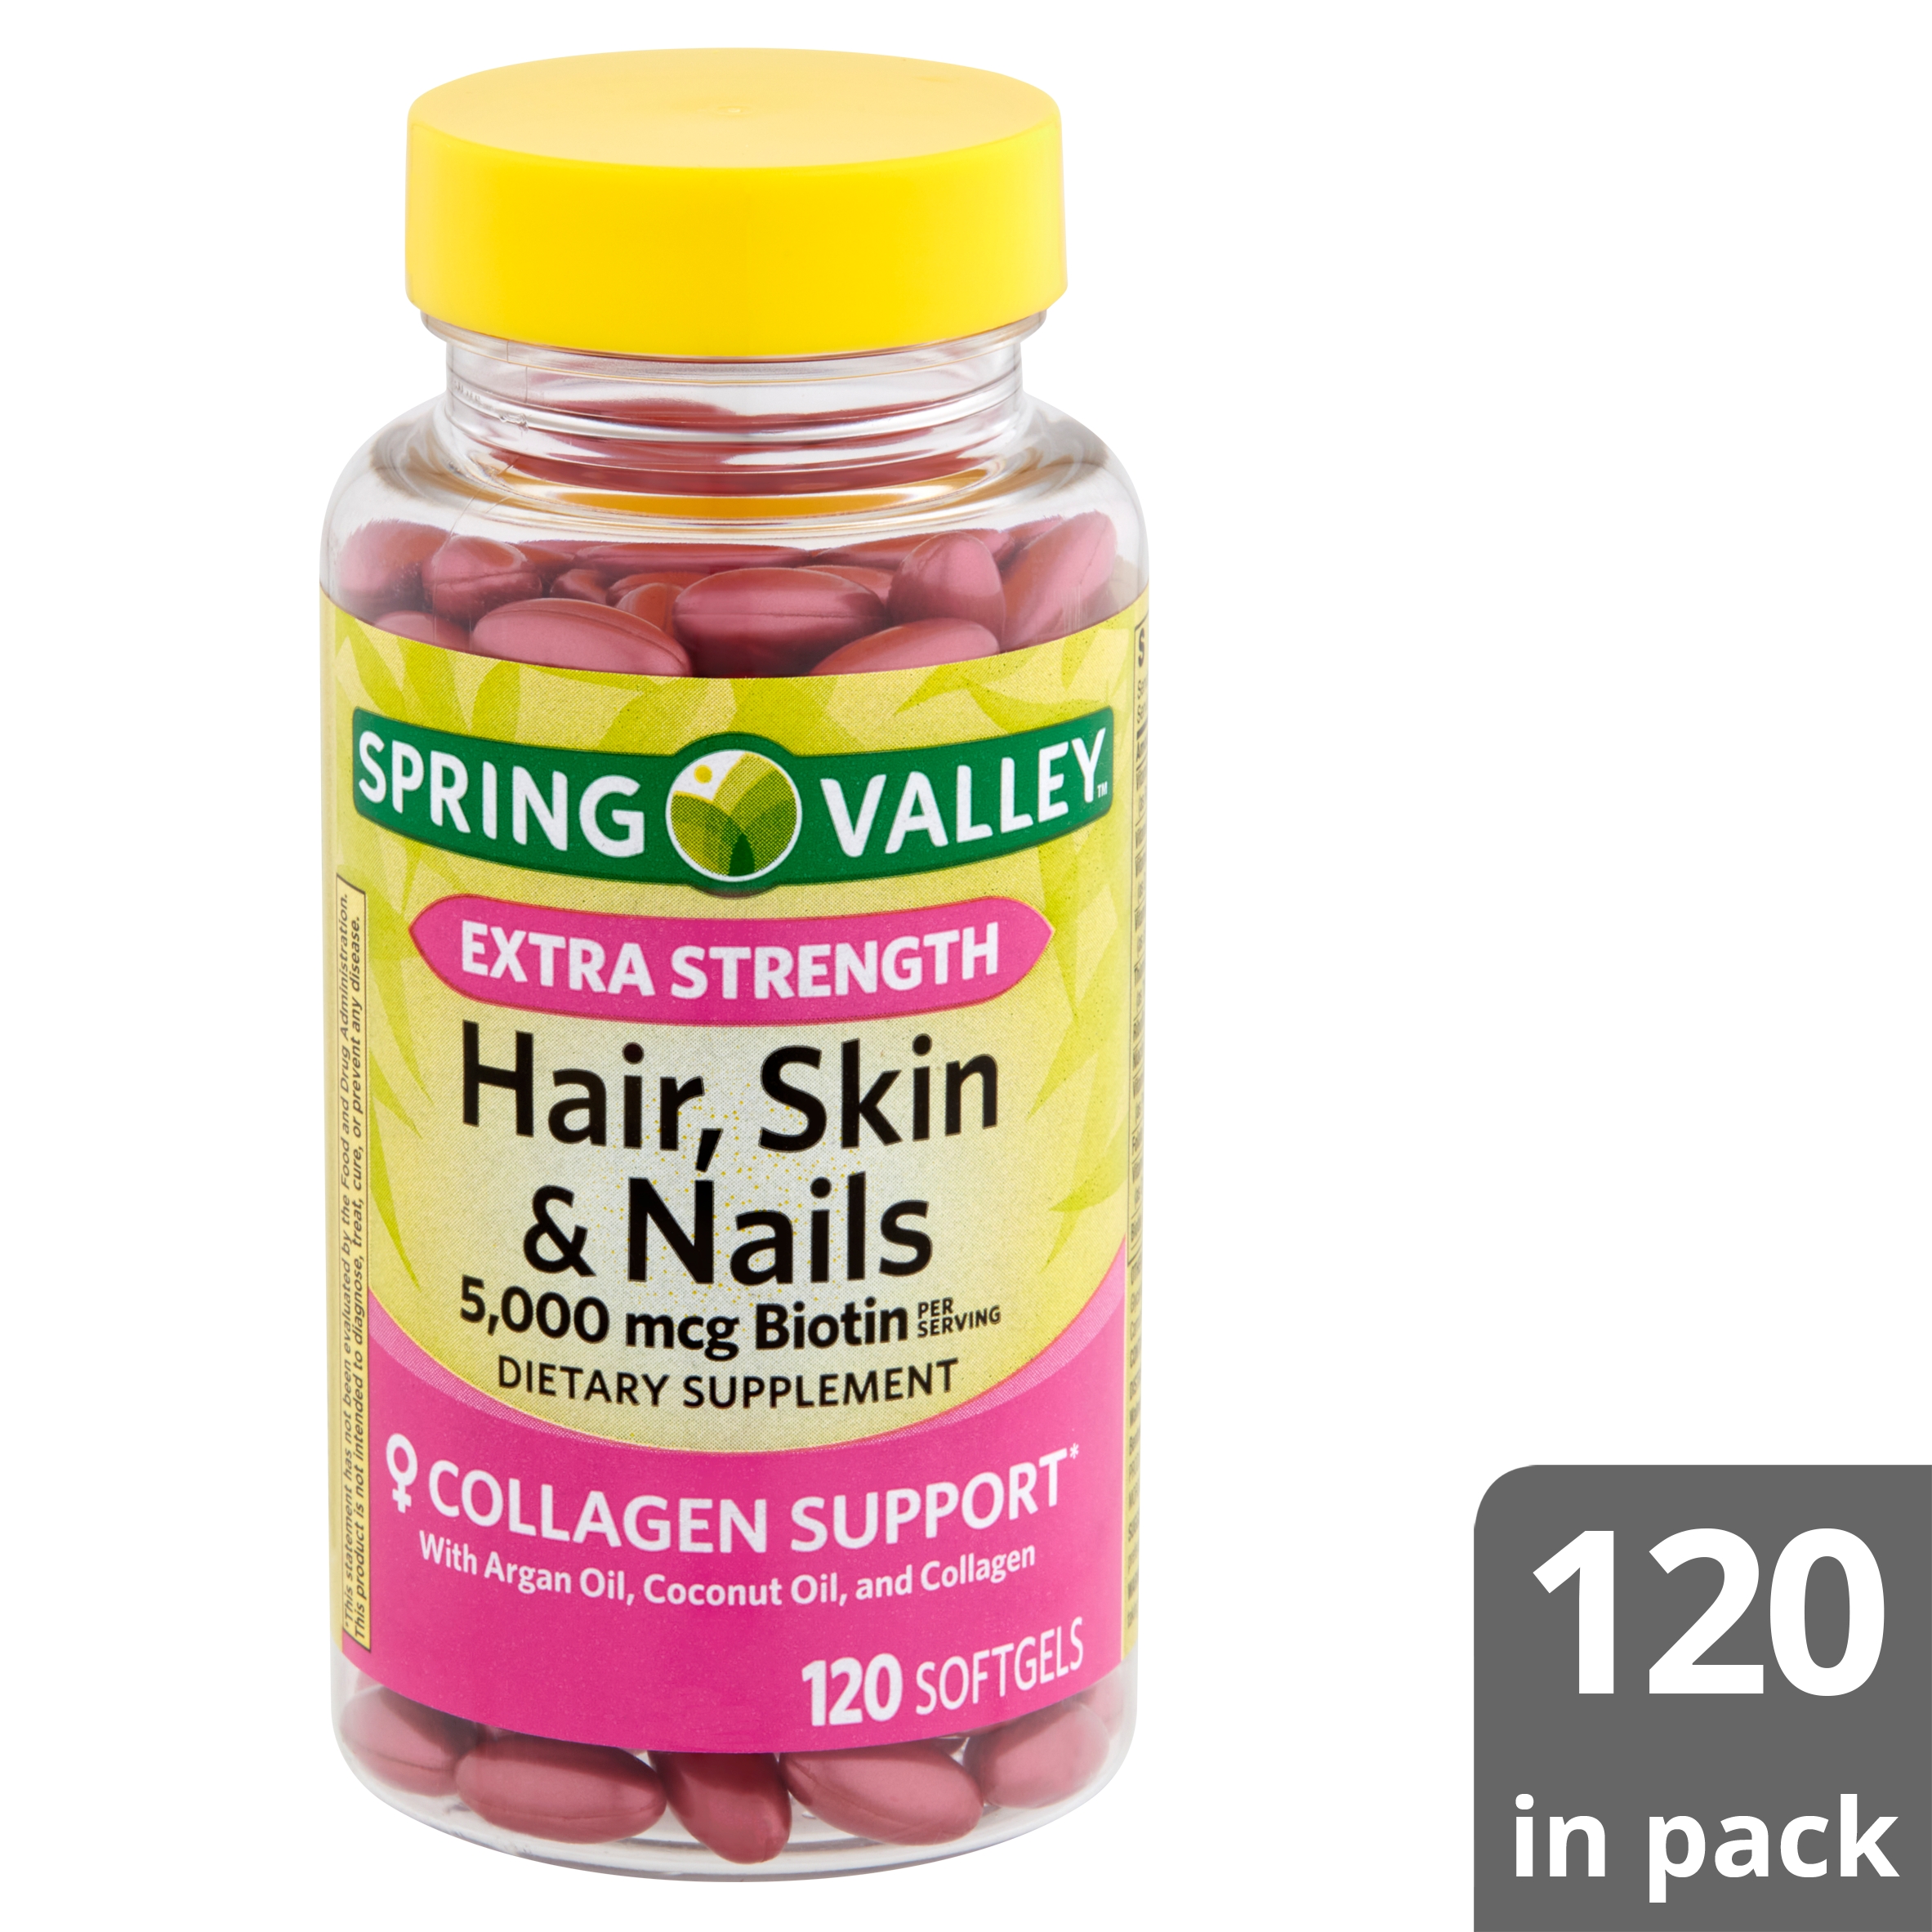 Spring Valley Hair, Skin & Nails Dietary Supplement Softgels, 5,000 Mcg Biotin, 120 Ct - image 8 of 13